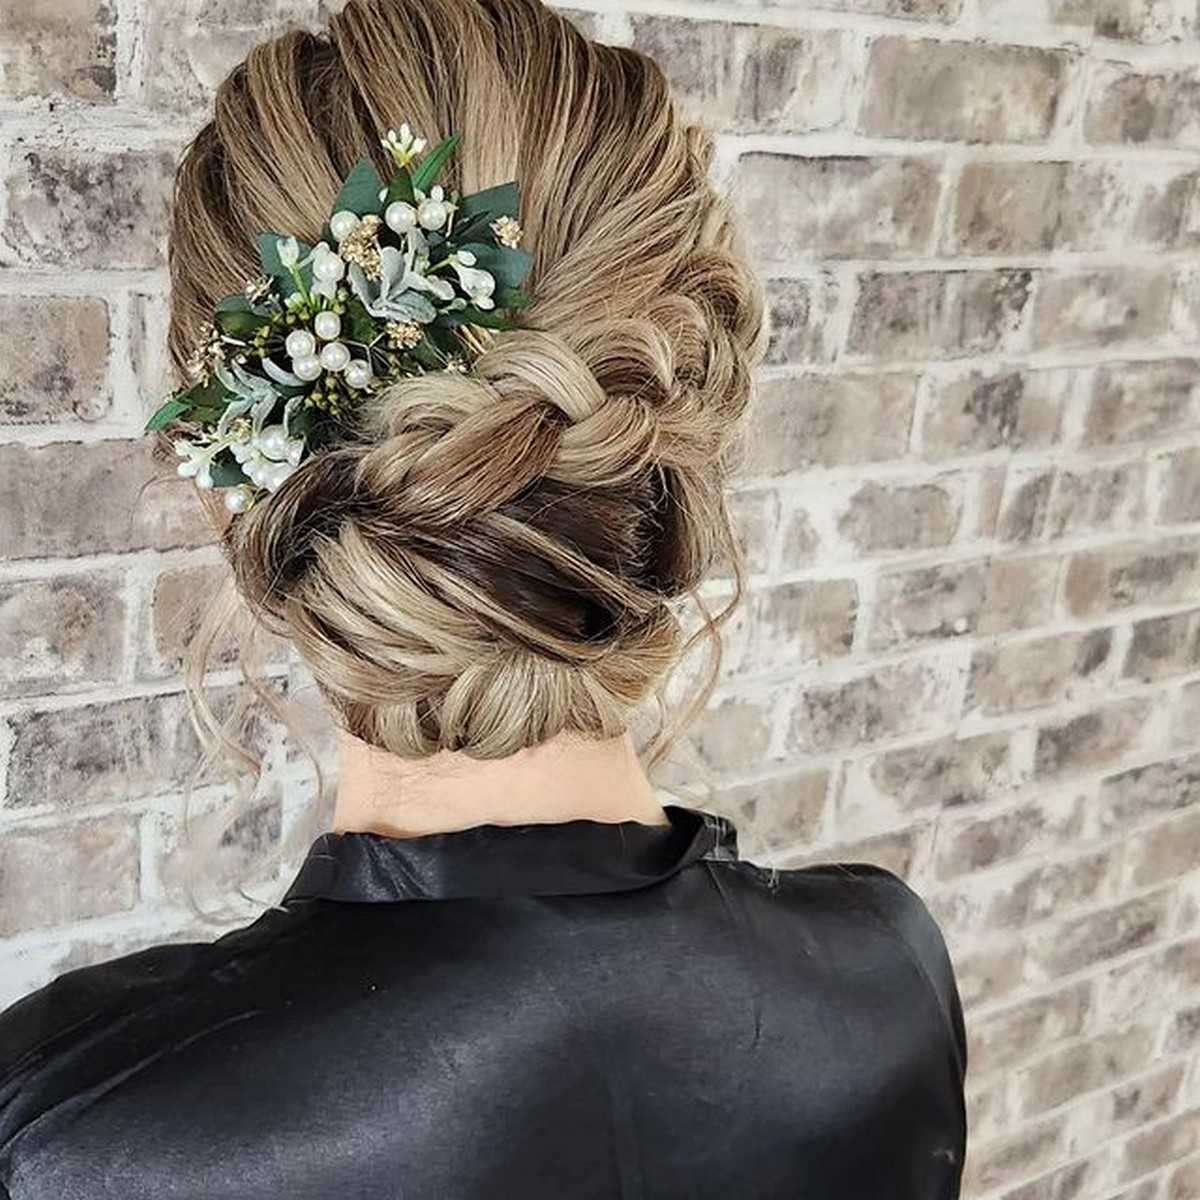 Highlight Blonde Braid Updo For Formal Events